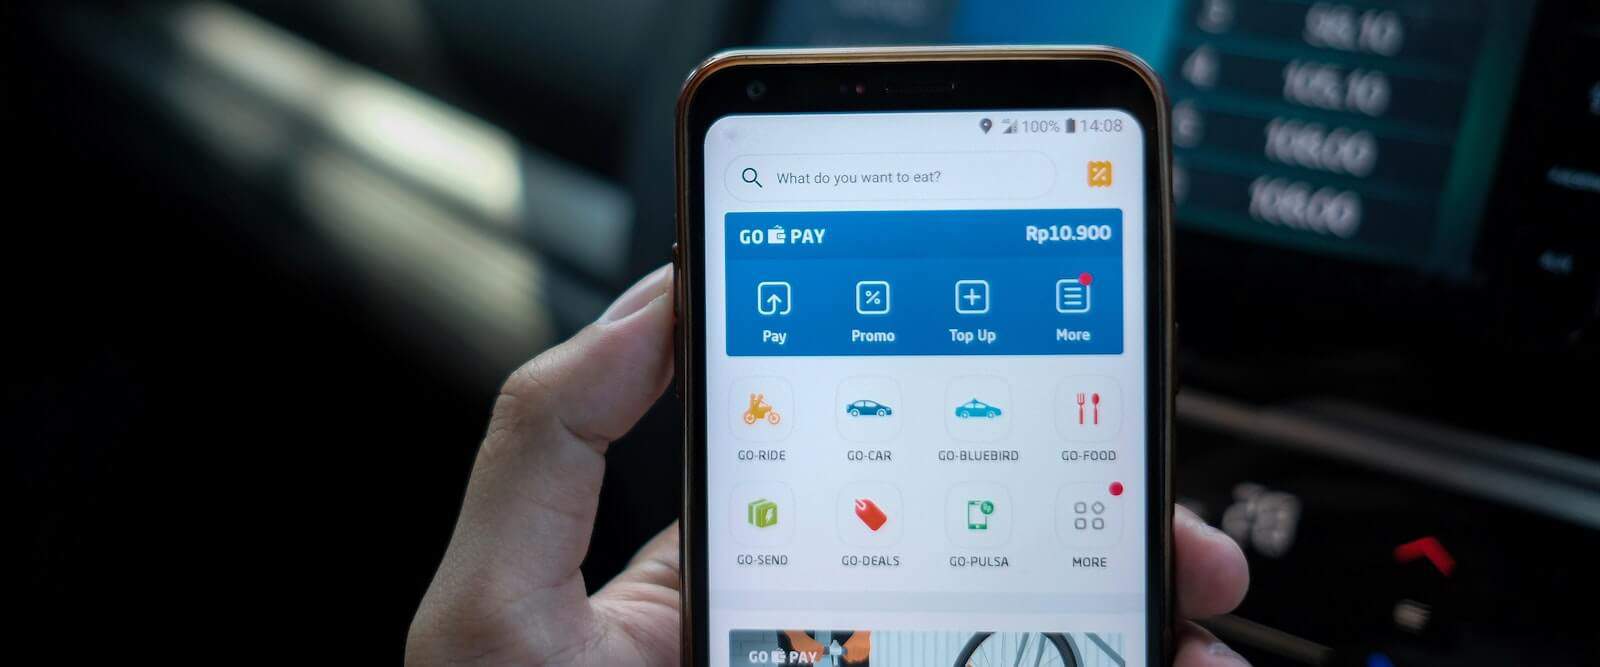 PPRO adds Gojek's GoPay to its Indonesian payment method offering